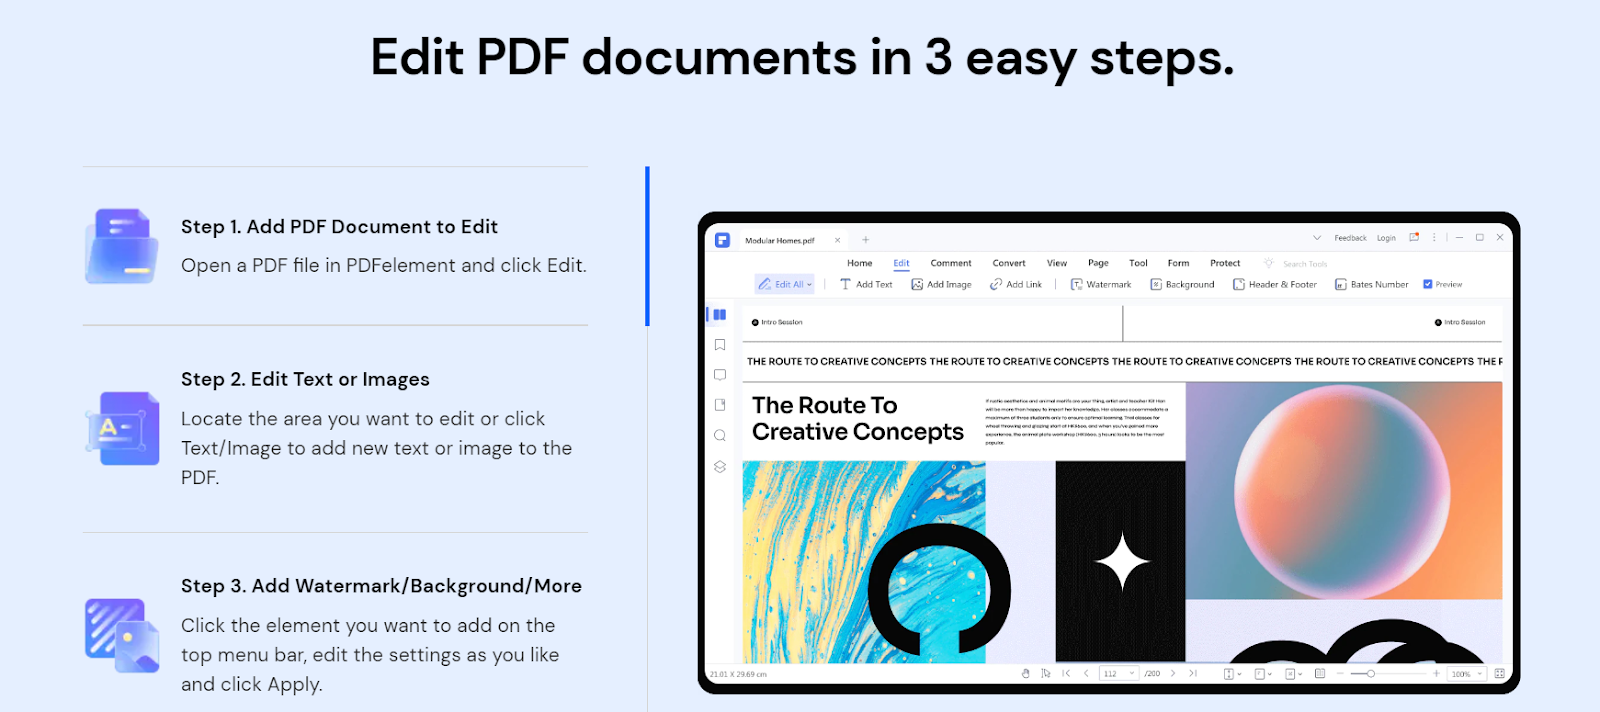 Editing PDF Documents with PDFelement in 3 Easy Steps